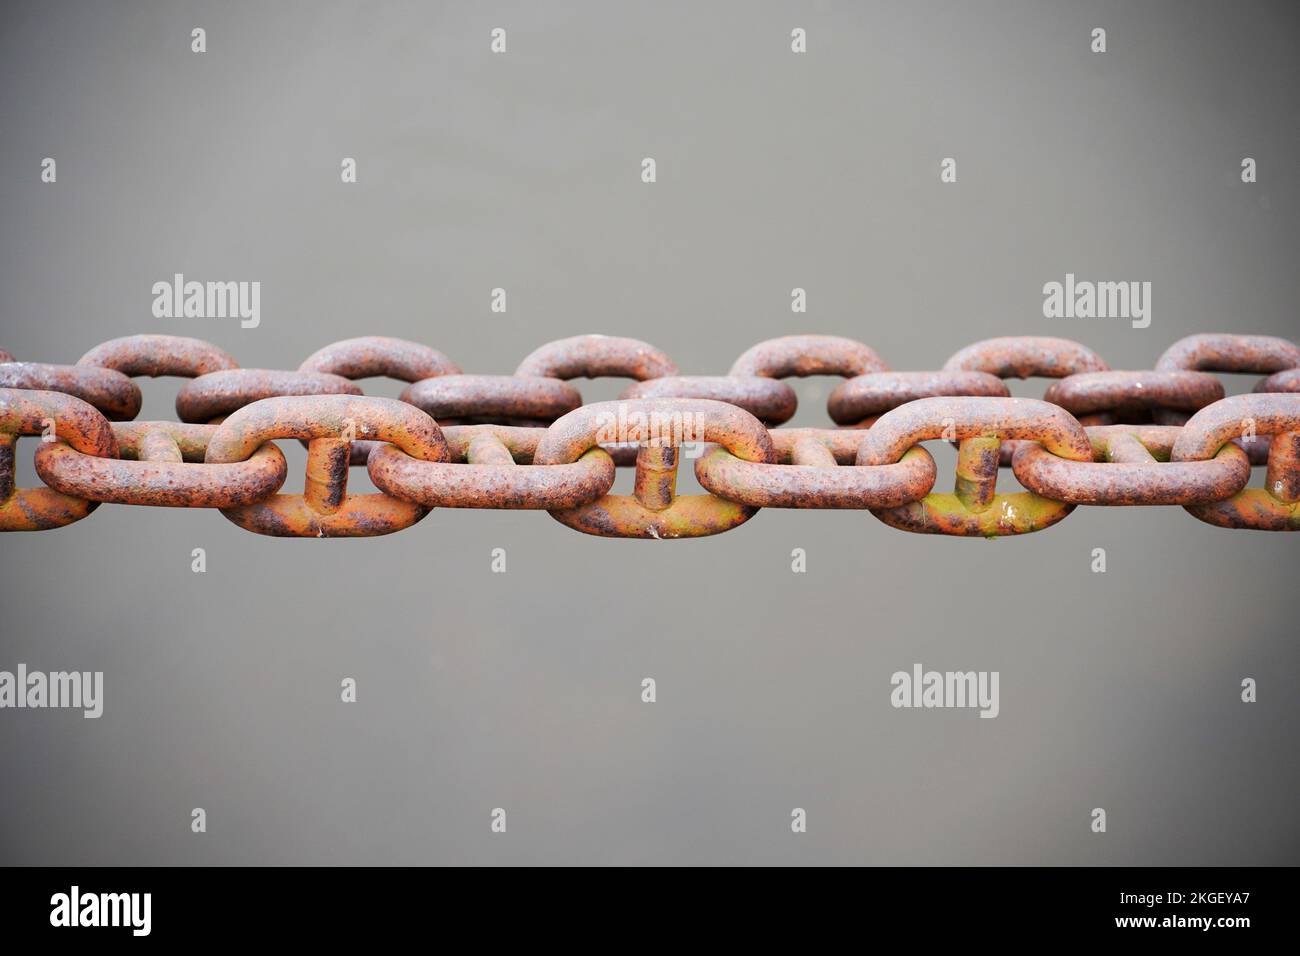 Rusty anchor chain against a gray background. Stock Photo